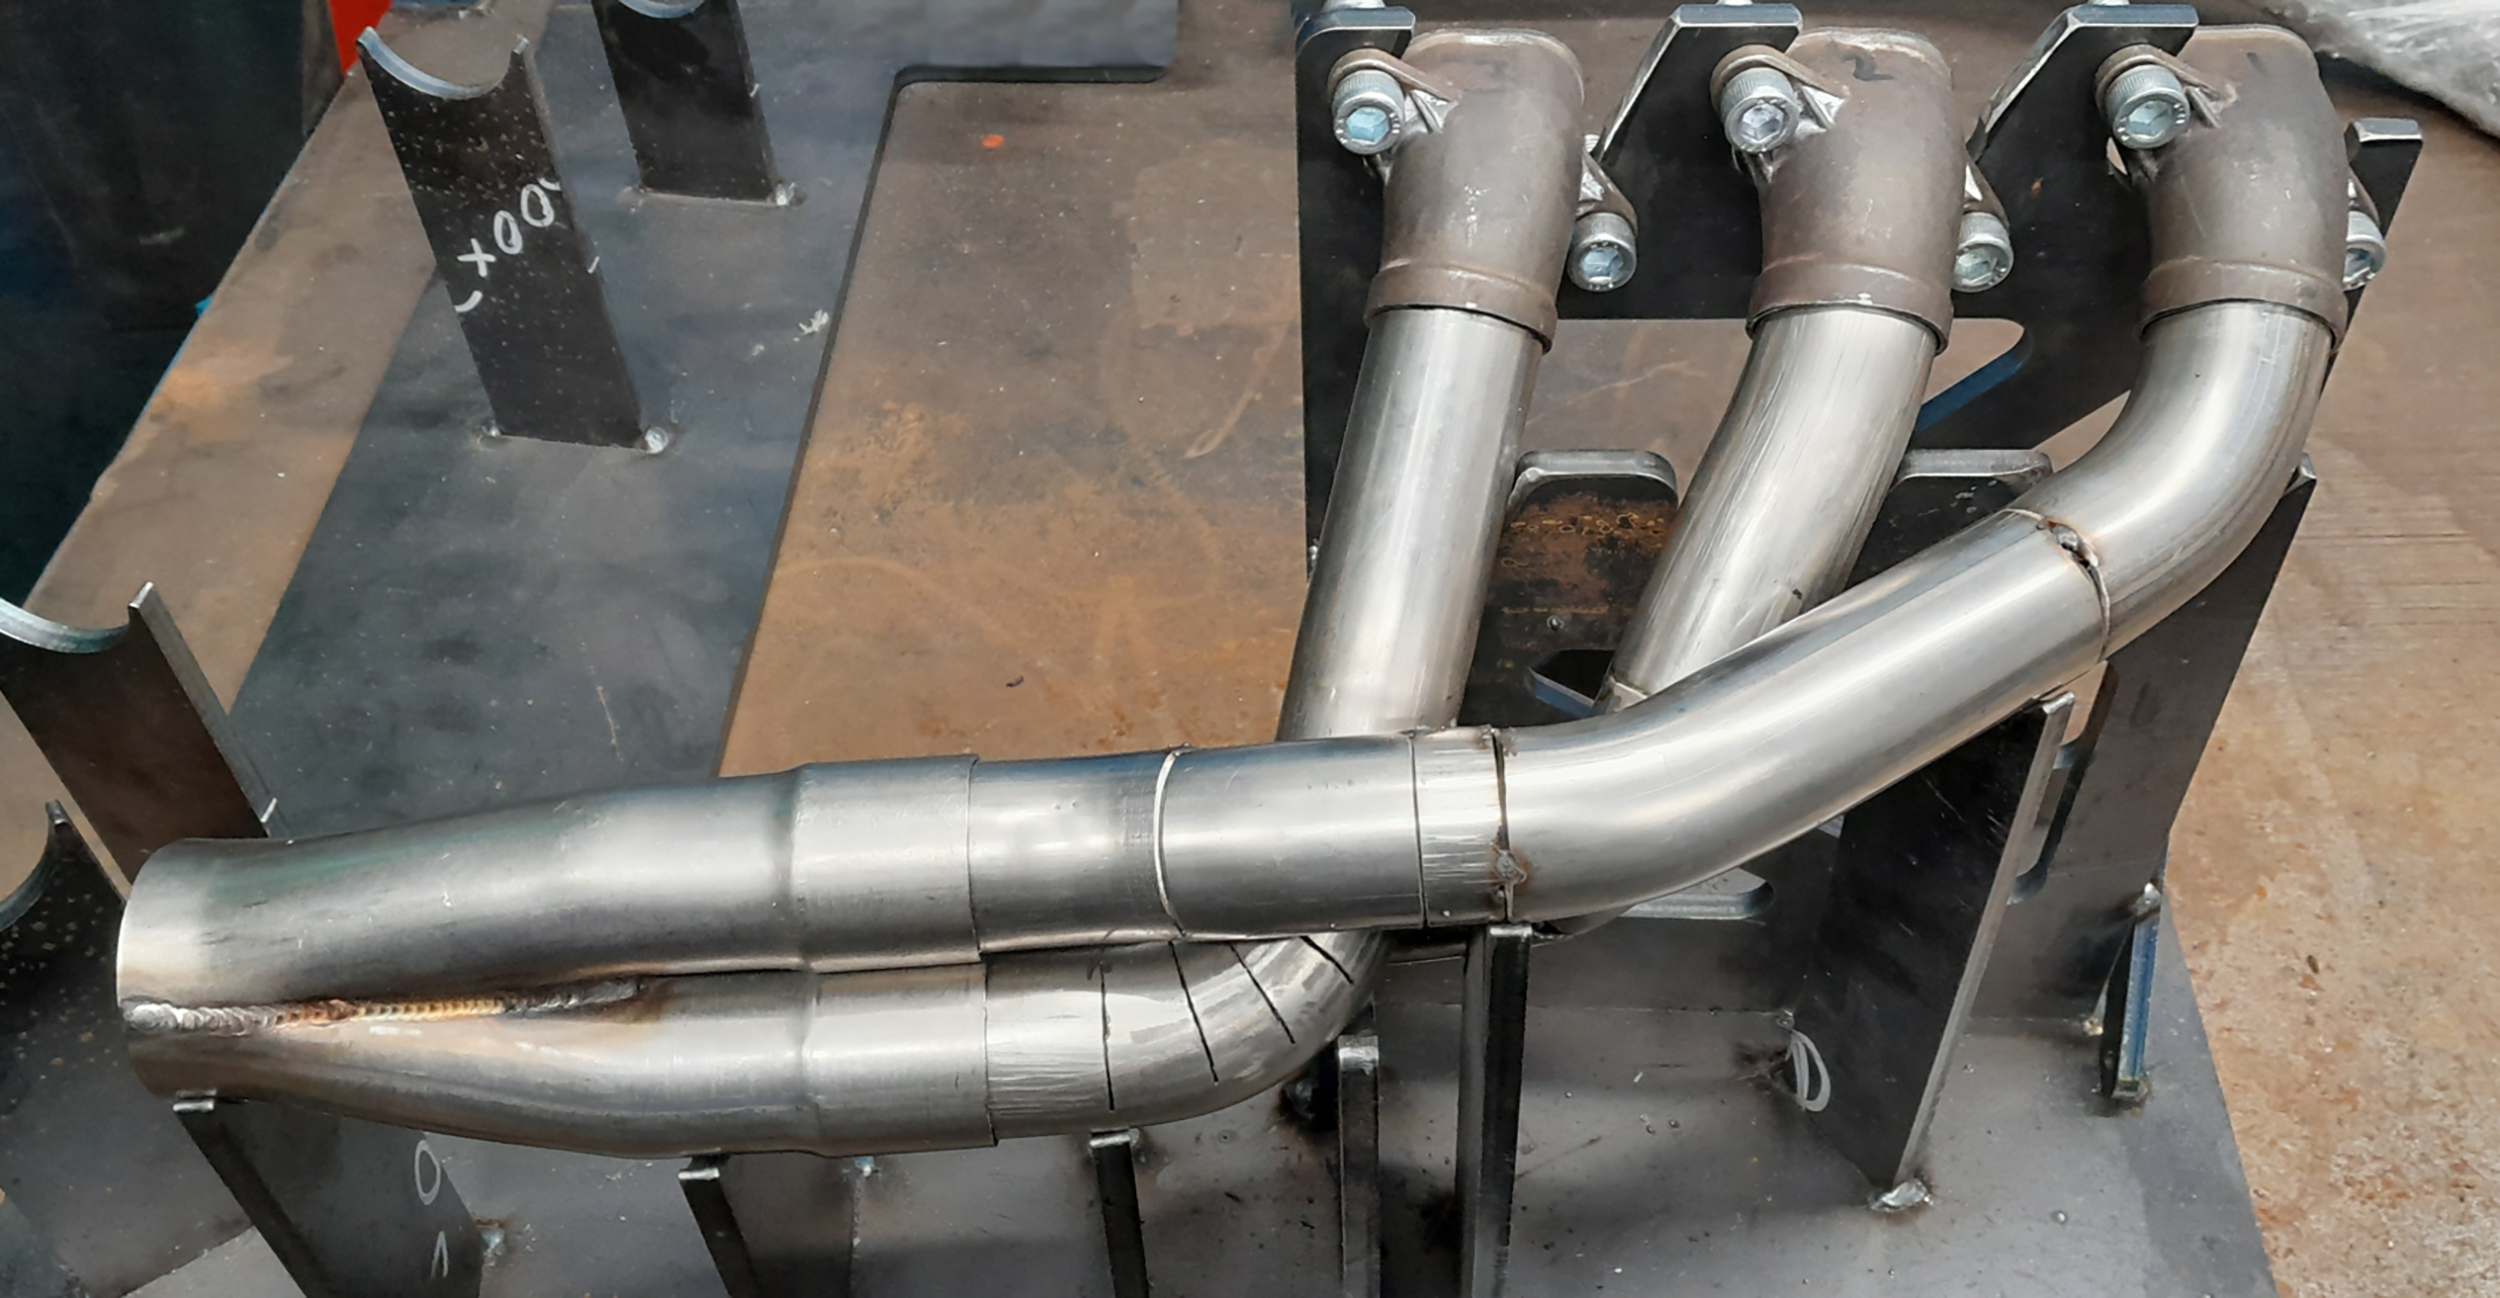 KMT produced a bespoke welding jig to allow assembly of a custom racing exhaust for the Staffordshire Uni Racing team